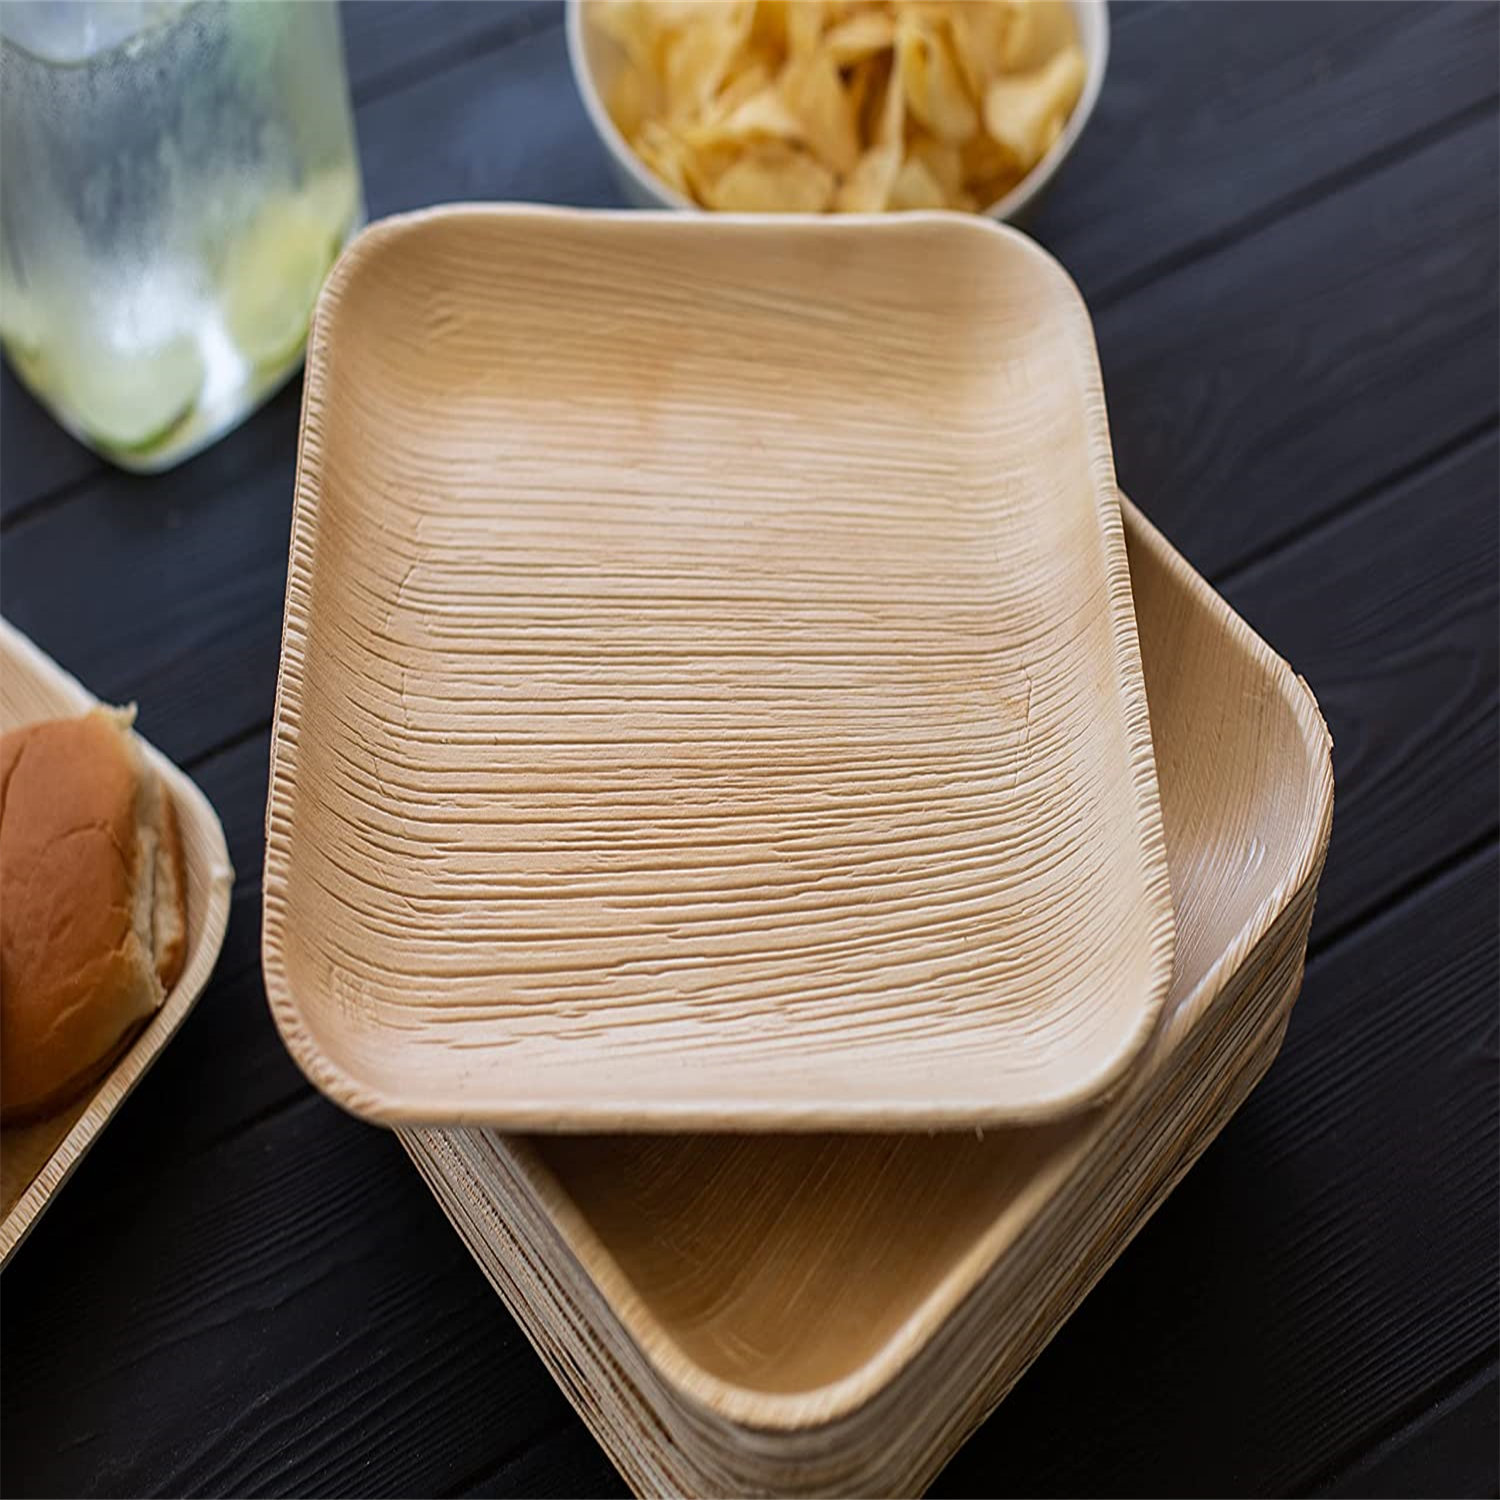 25 PACK, VARIOUS SIZES Palm Leaf Plates Disposable Biodegradable Compostable 